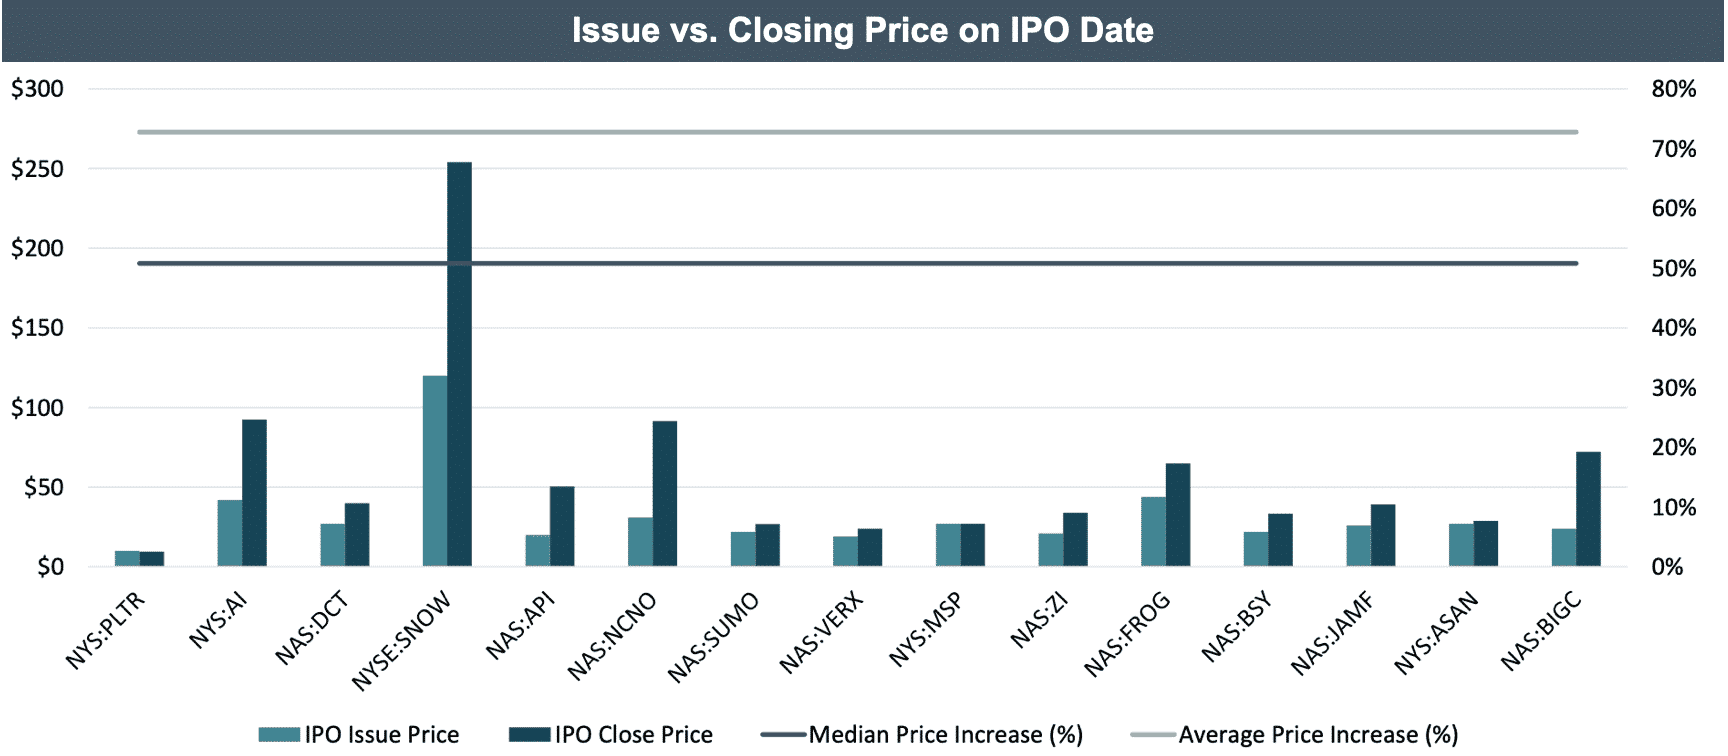 Issue vs. Closing Price on IPO Date